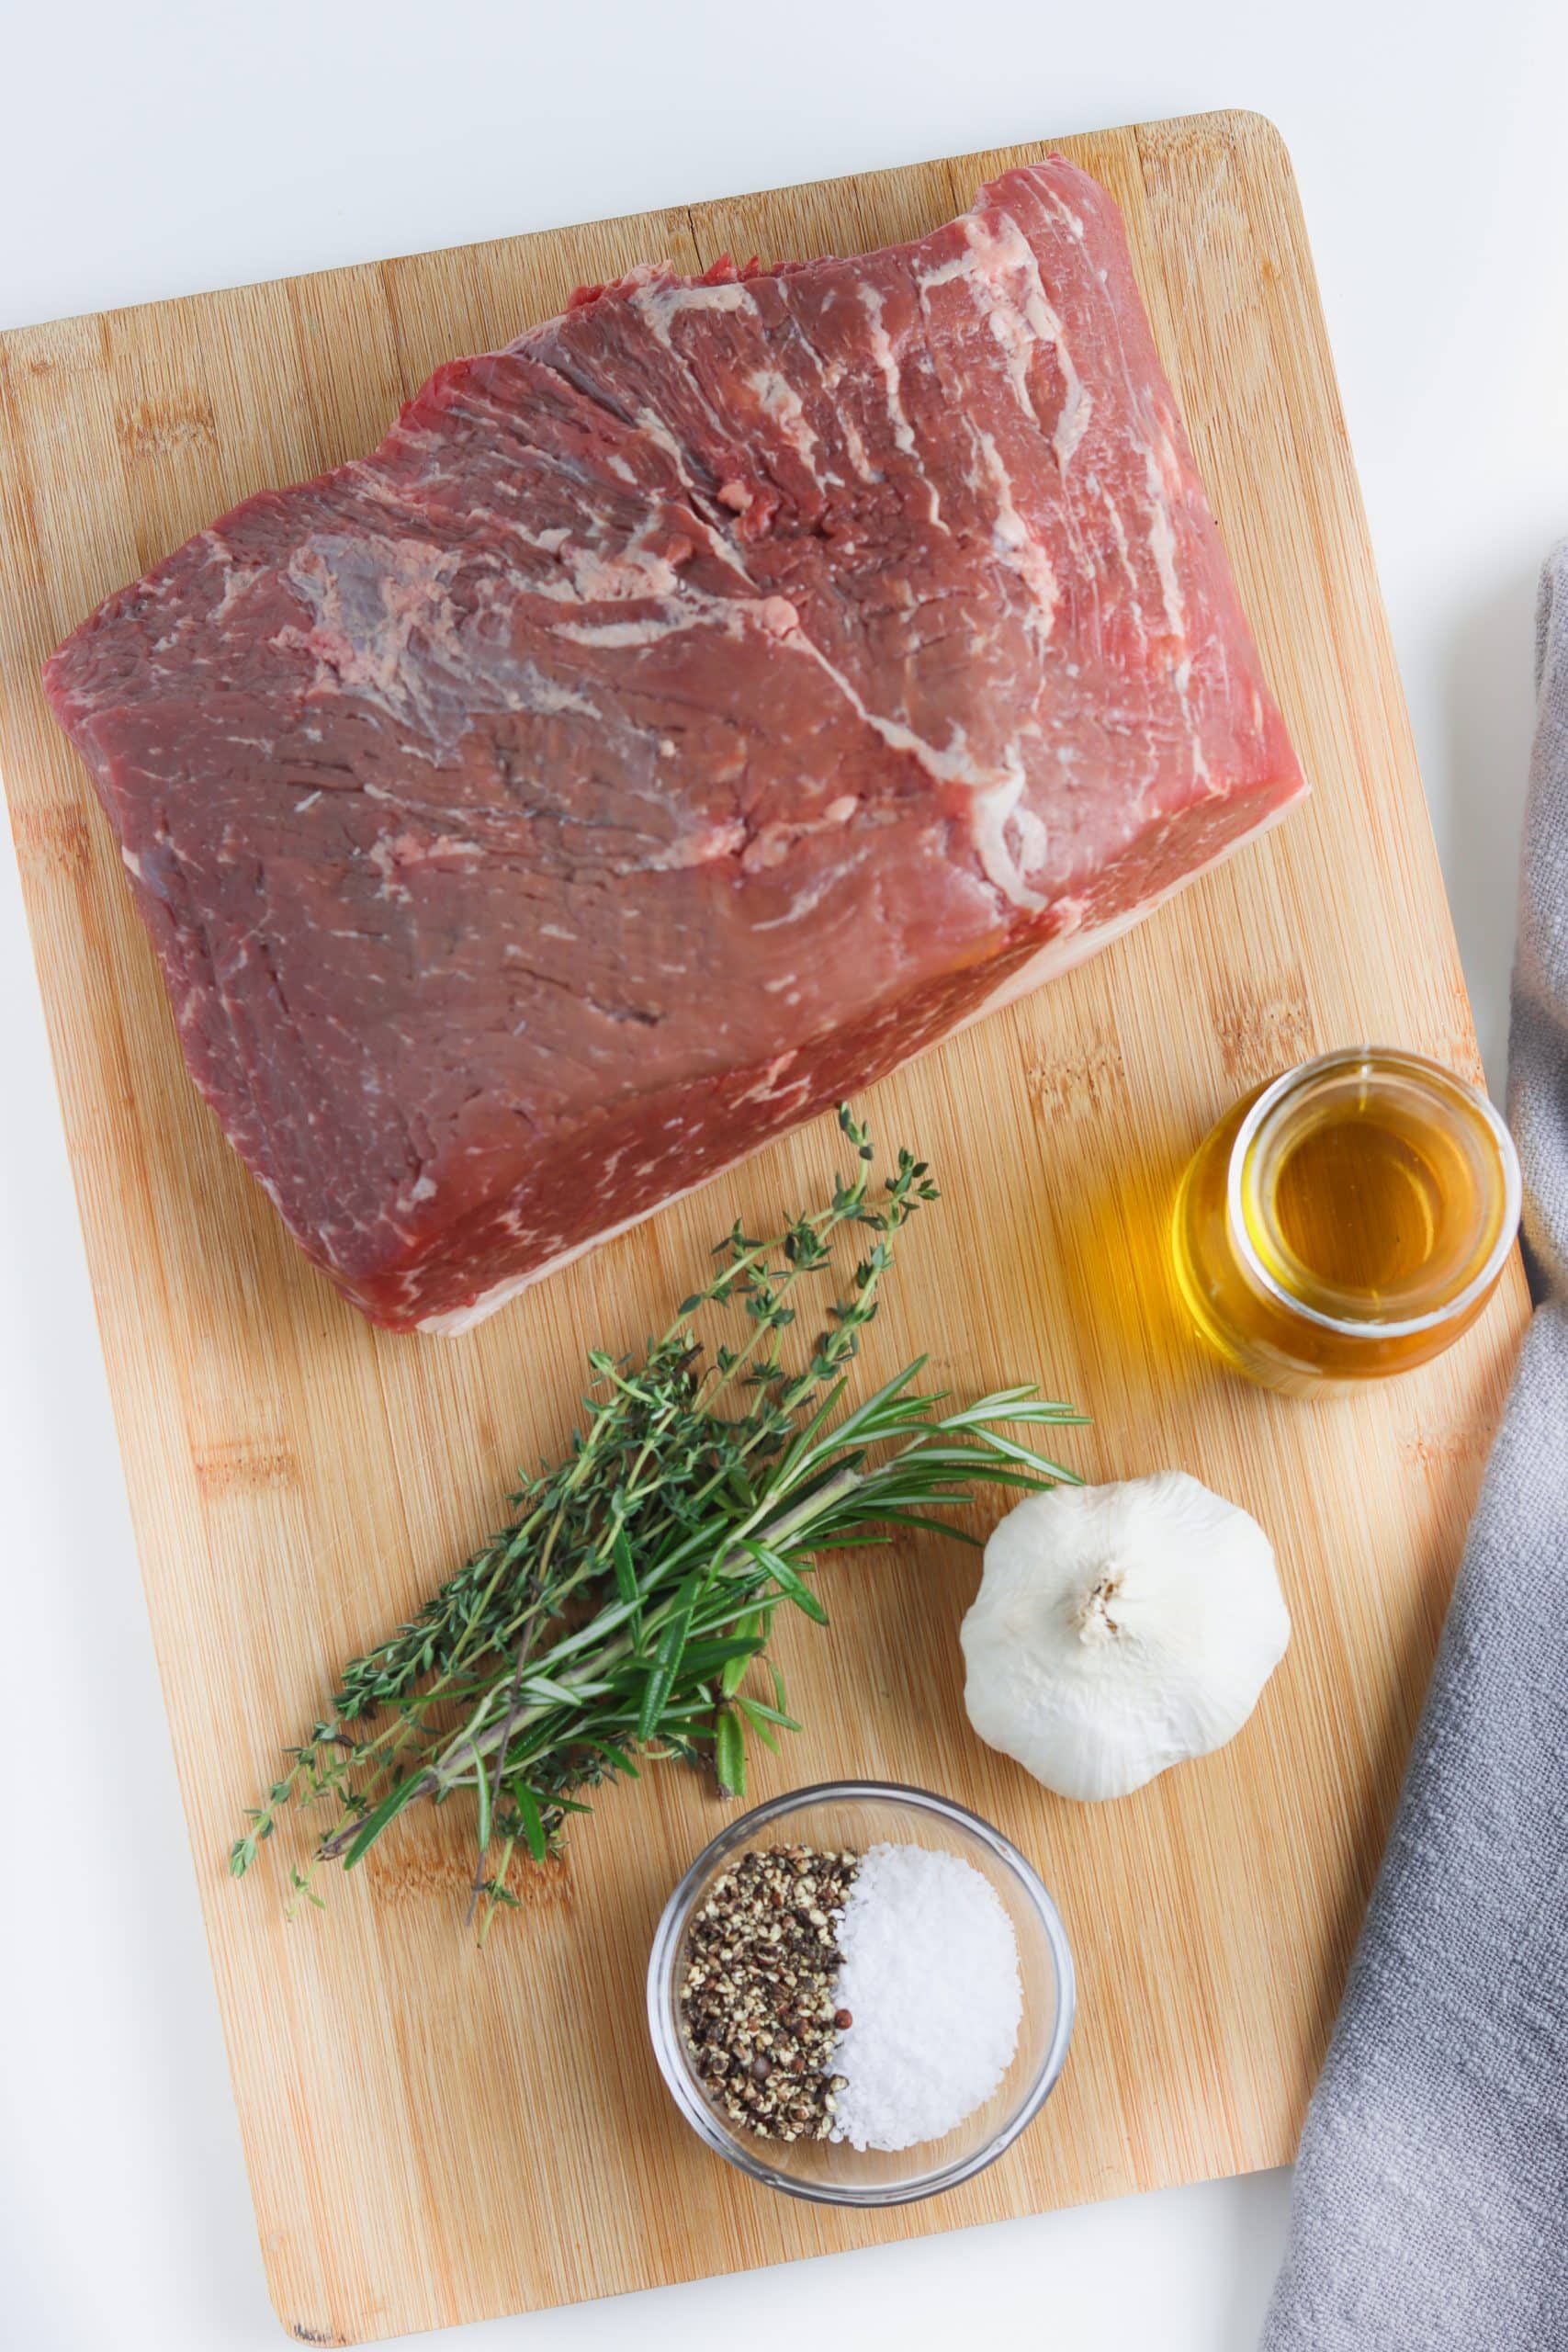 Flatlay image of ingredients needed to make a classic roast beef, including rump roast, fresh garlic and herbs, and olive oil. 